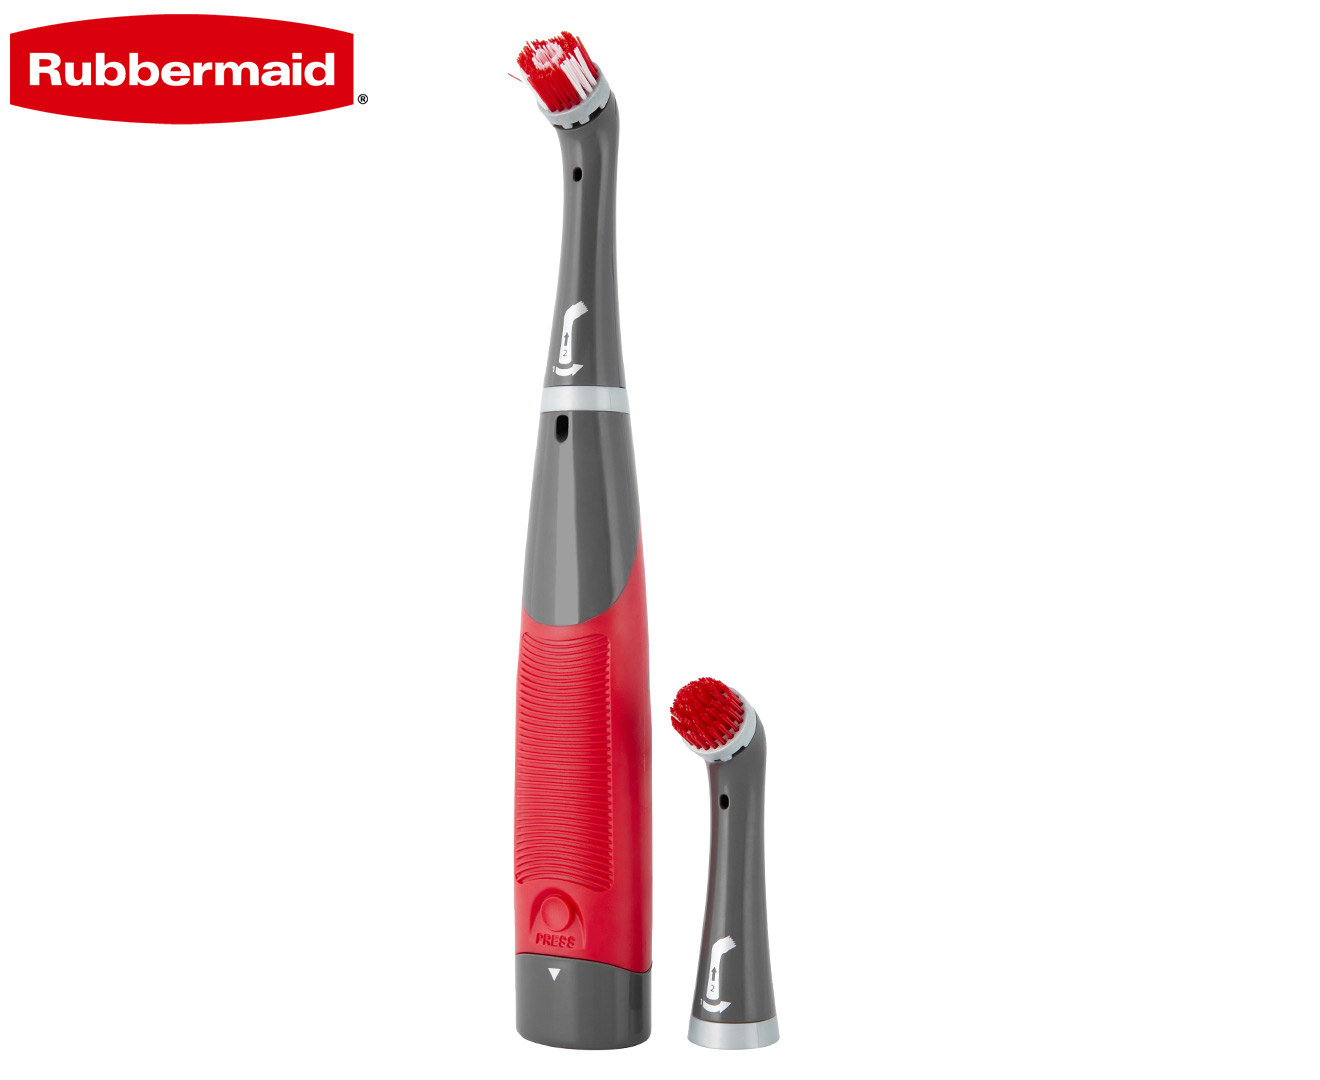 Rubbermaid Power Scrubber With 1 All-purpose Scrubbing Head And 1